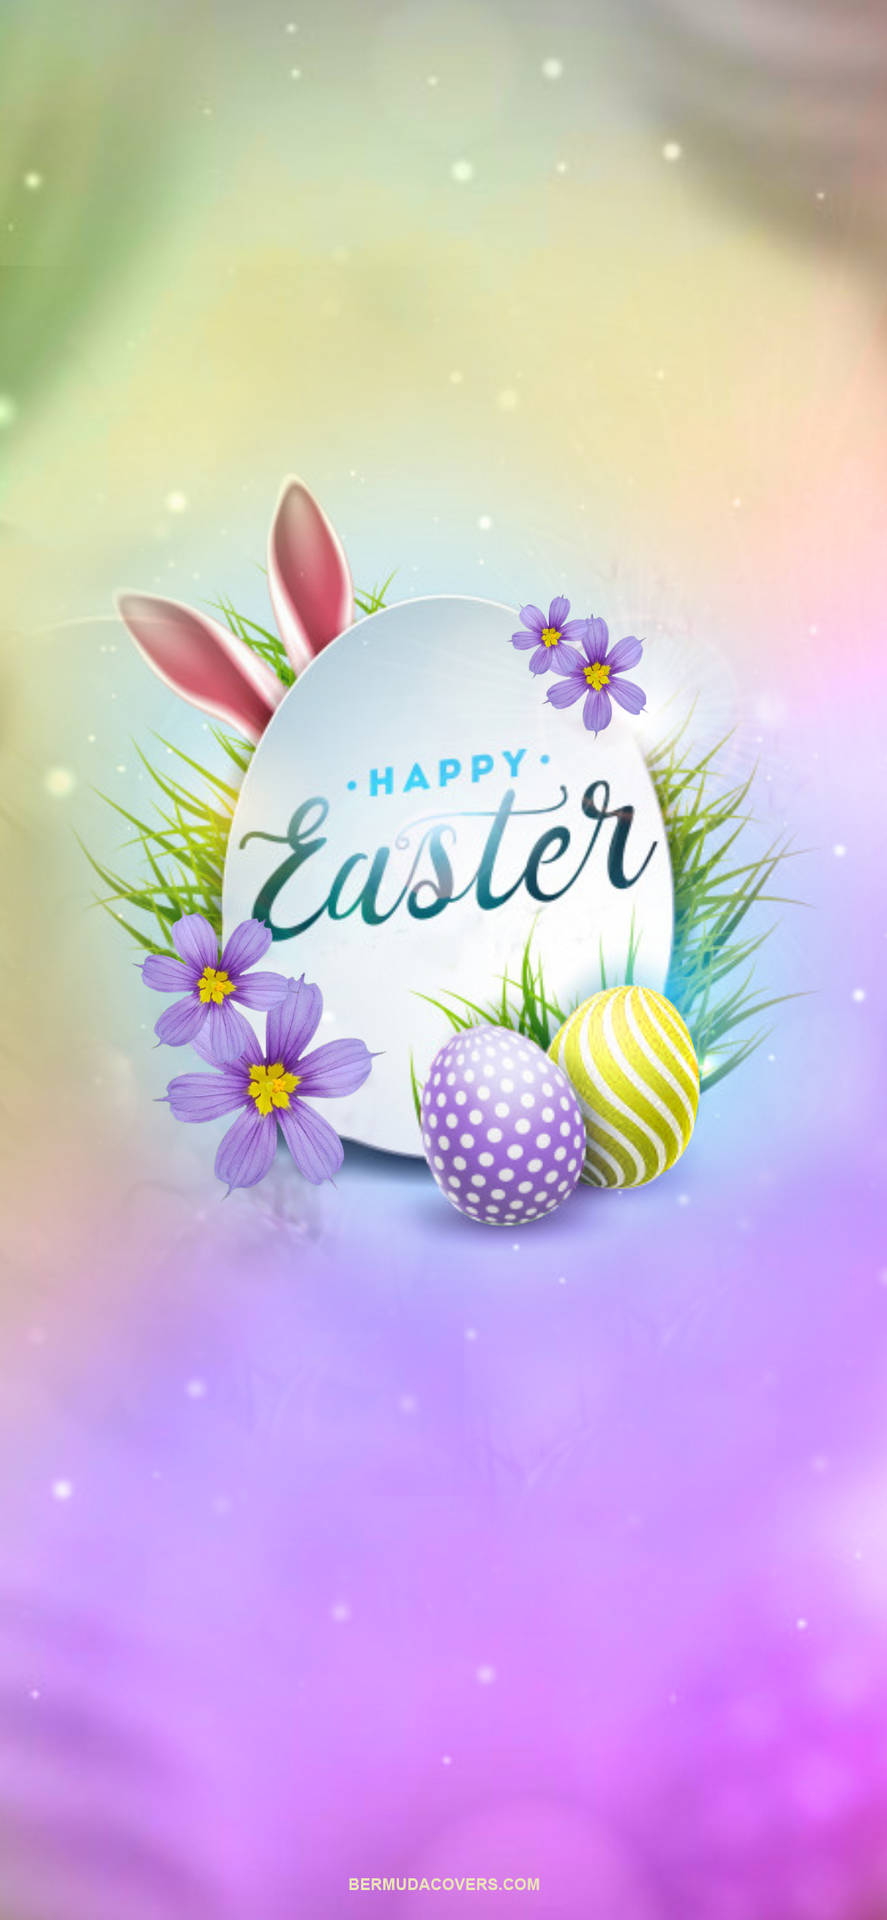 Celebrate Easter with Your Phone Wallpaper